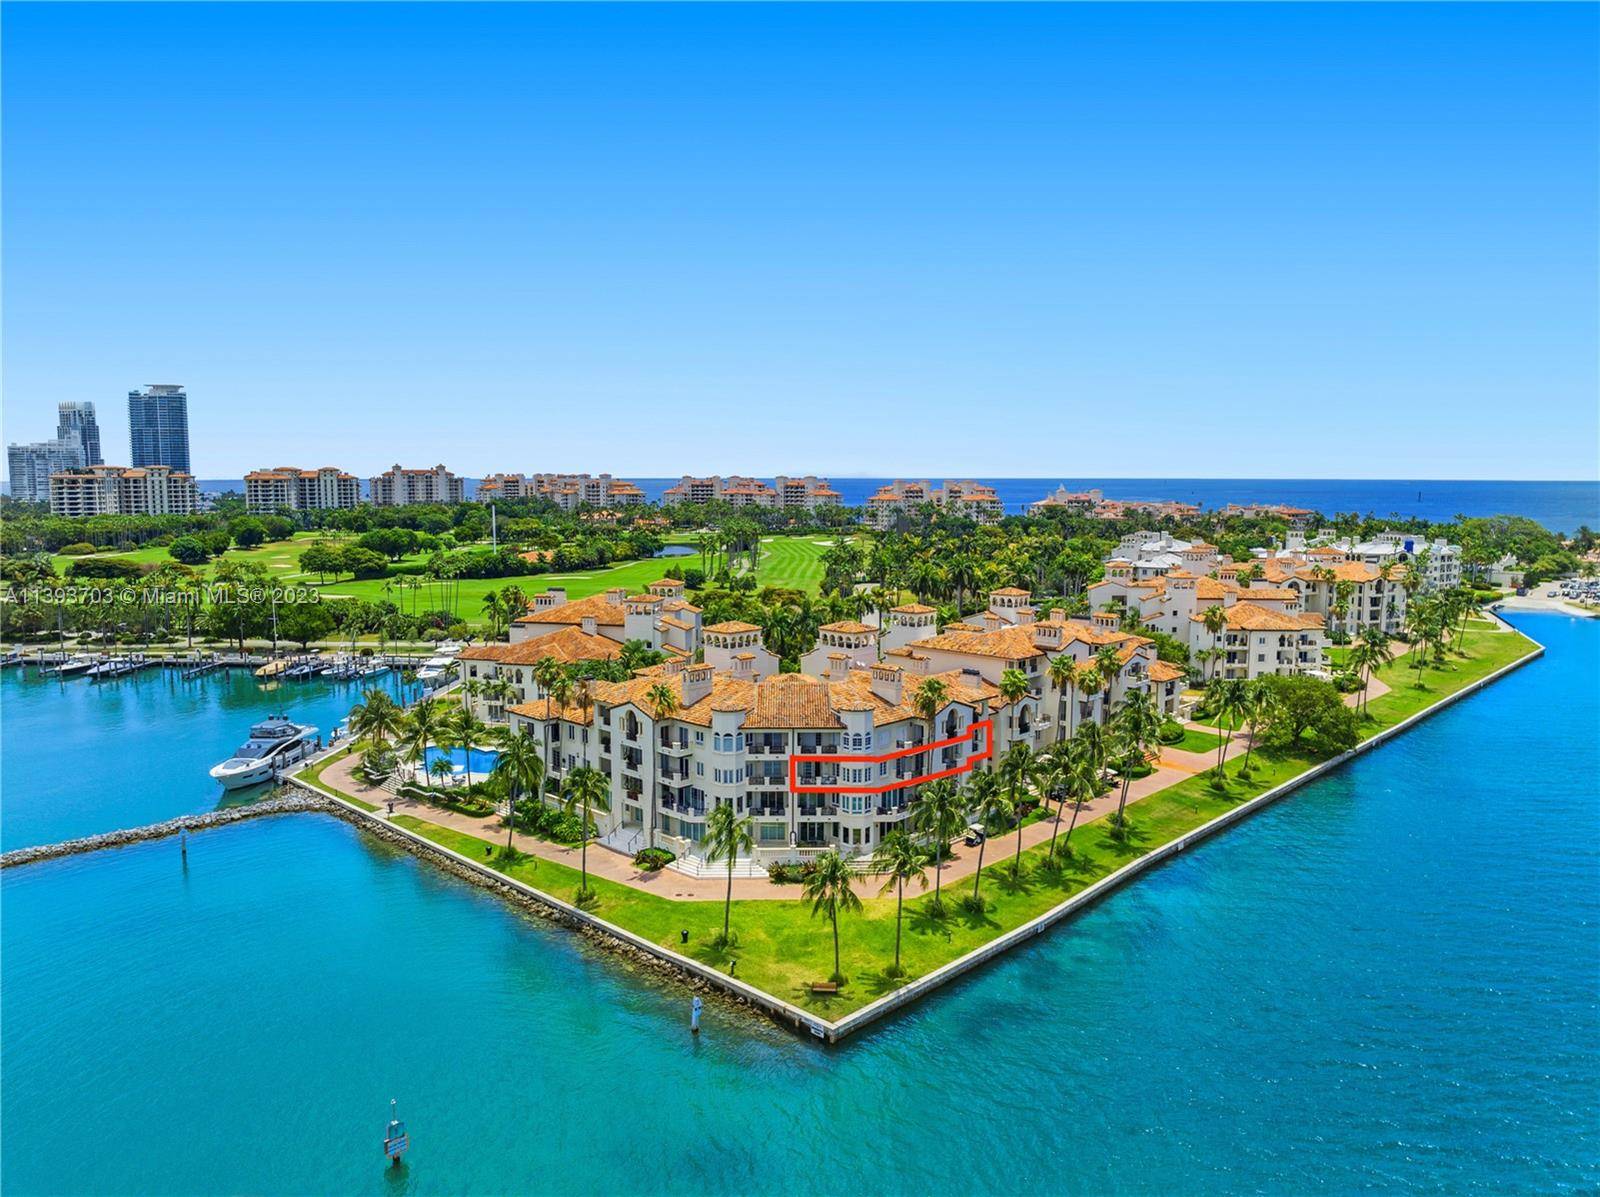 EXPERIENCE FISHER ISLAND LIVING AT IT'S FINEST IN THIS SPECTACULAR BAYSIDE VILLAGE RENTAL OVERLOOKING THE MIAMI DOWNTOWN SKYLINE BISCAYNE BAY.